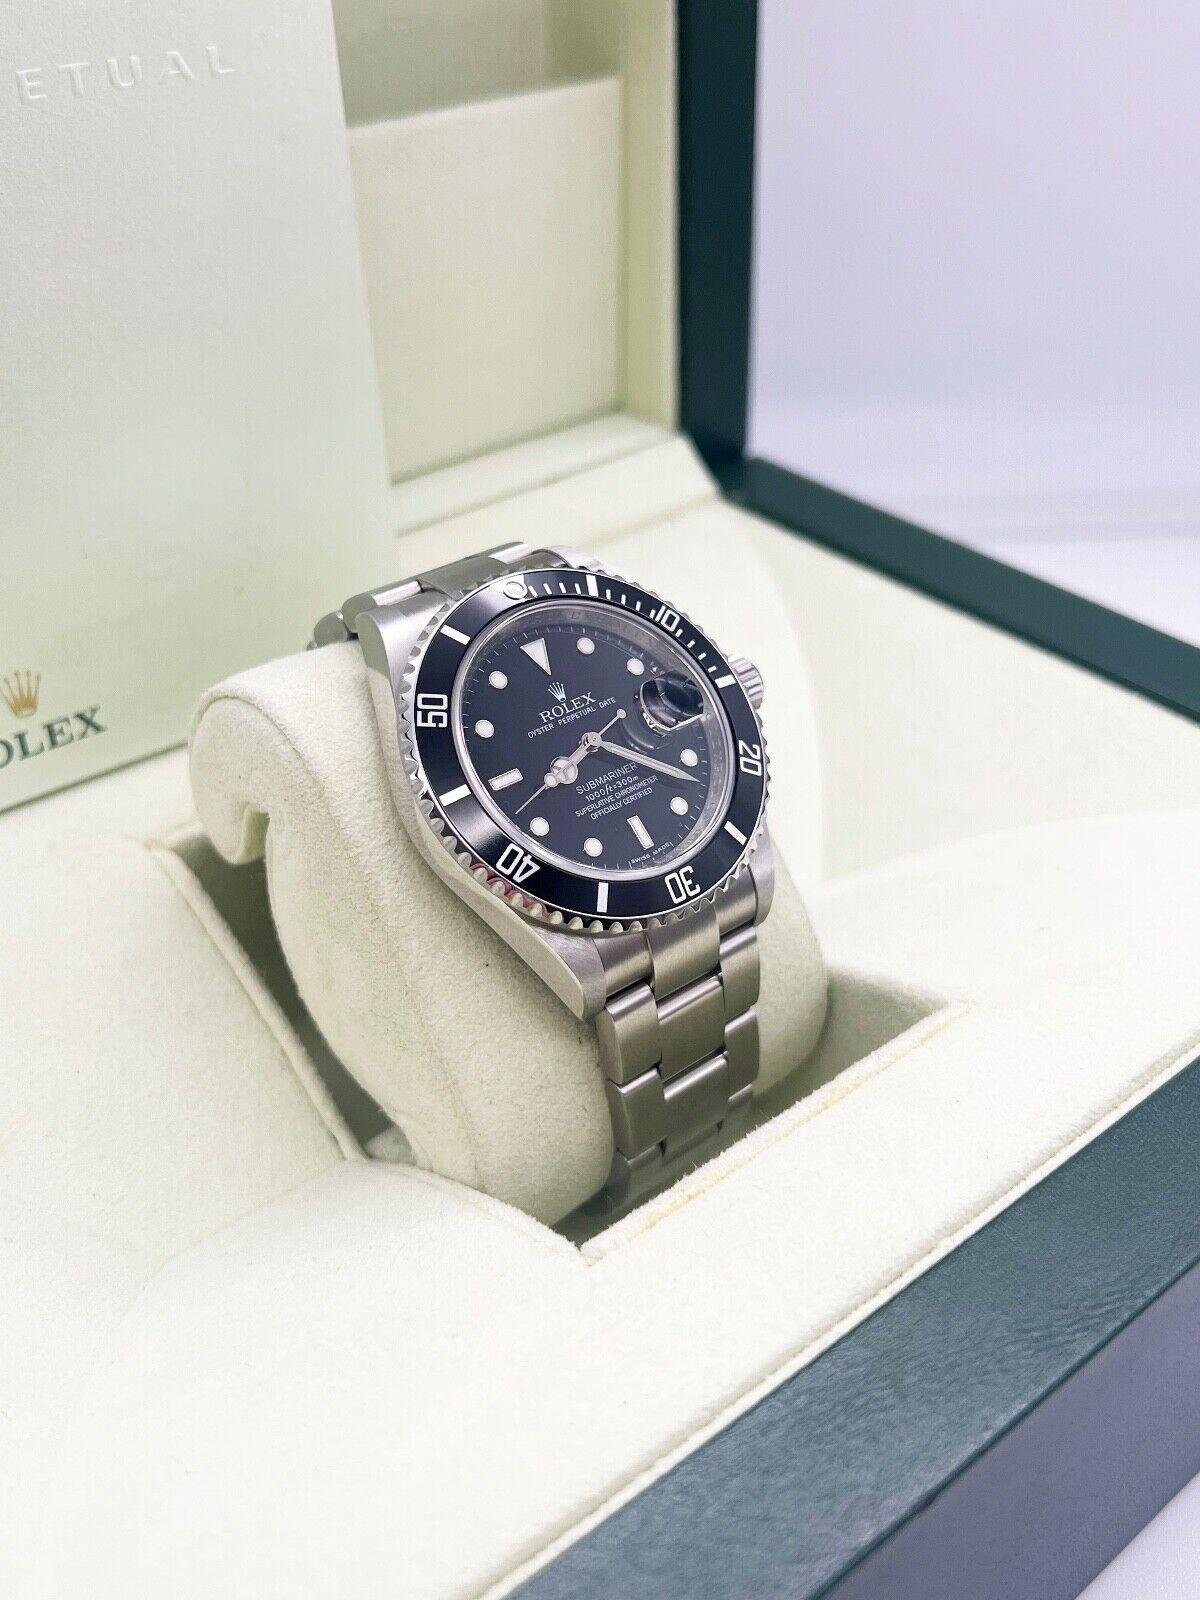 RARE 2010 Rolex 16610 Submariner Black Dial Steel Box Paper REHAUT UNPOLISHED In Excellent Condition For Sale In San Diego, CA